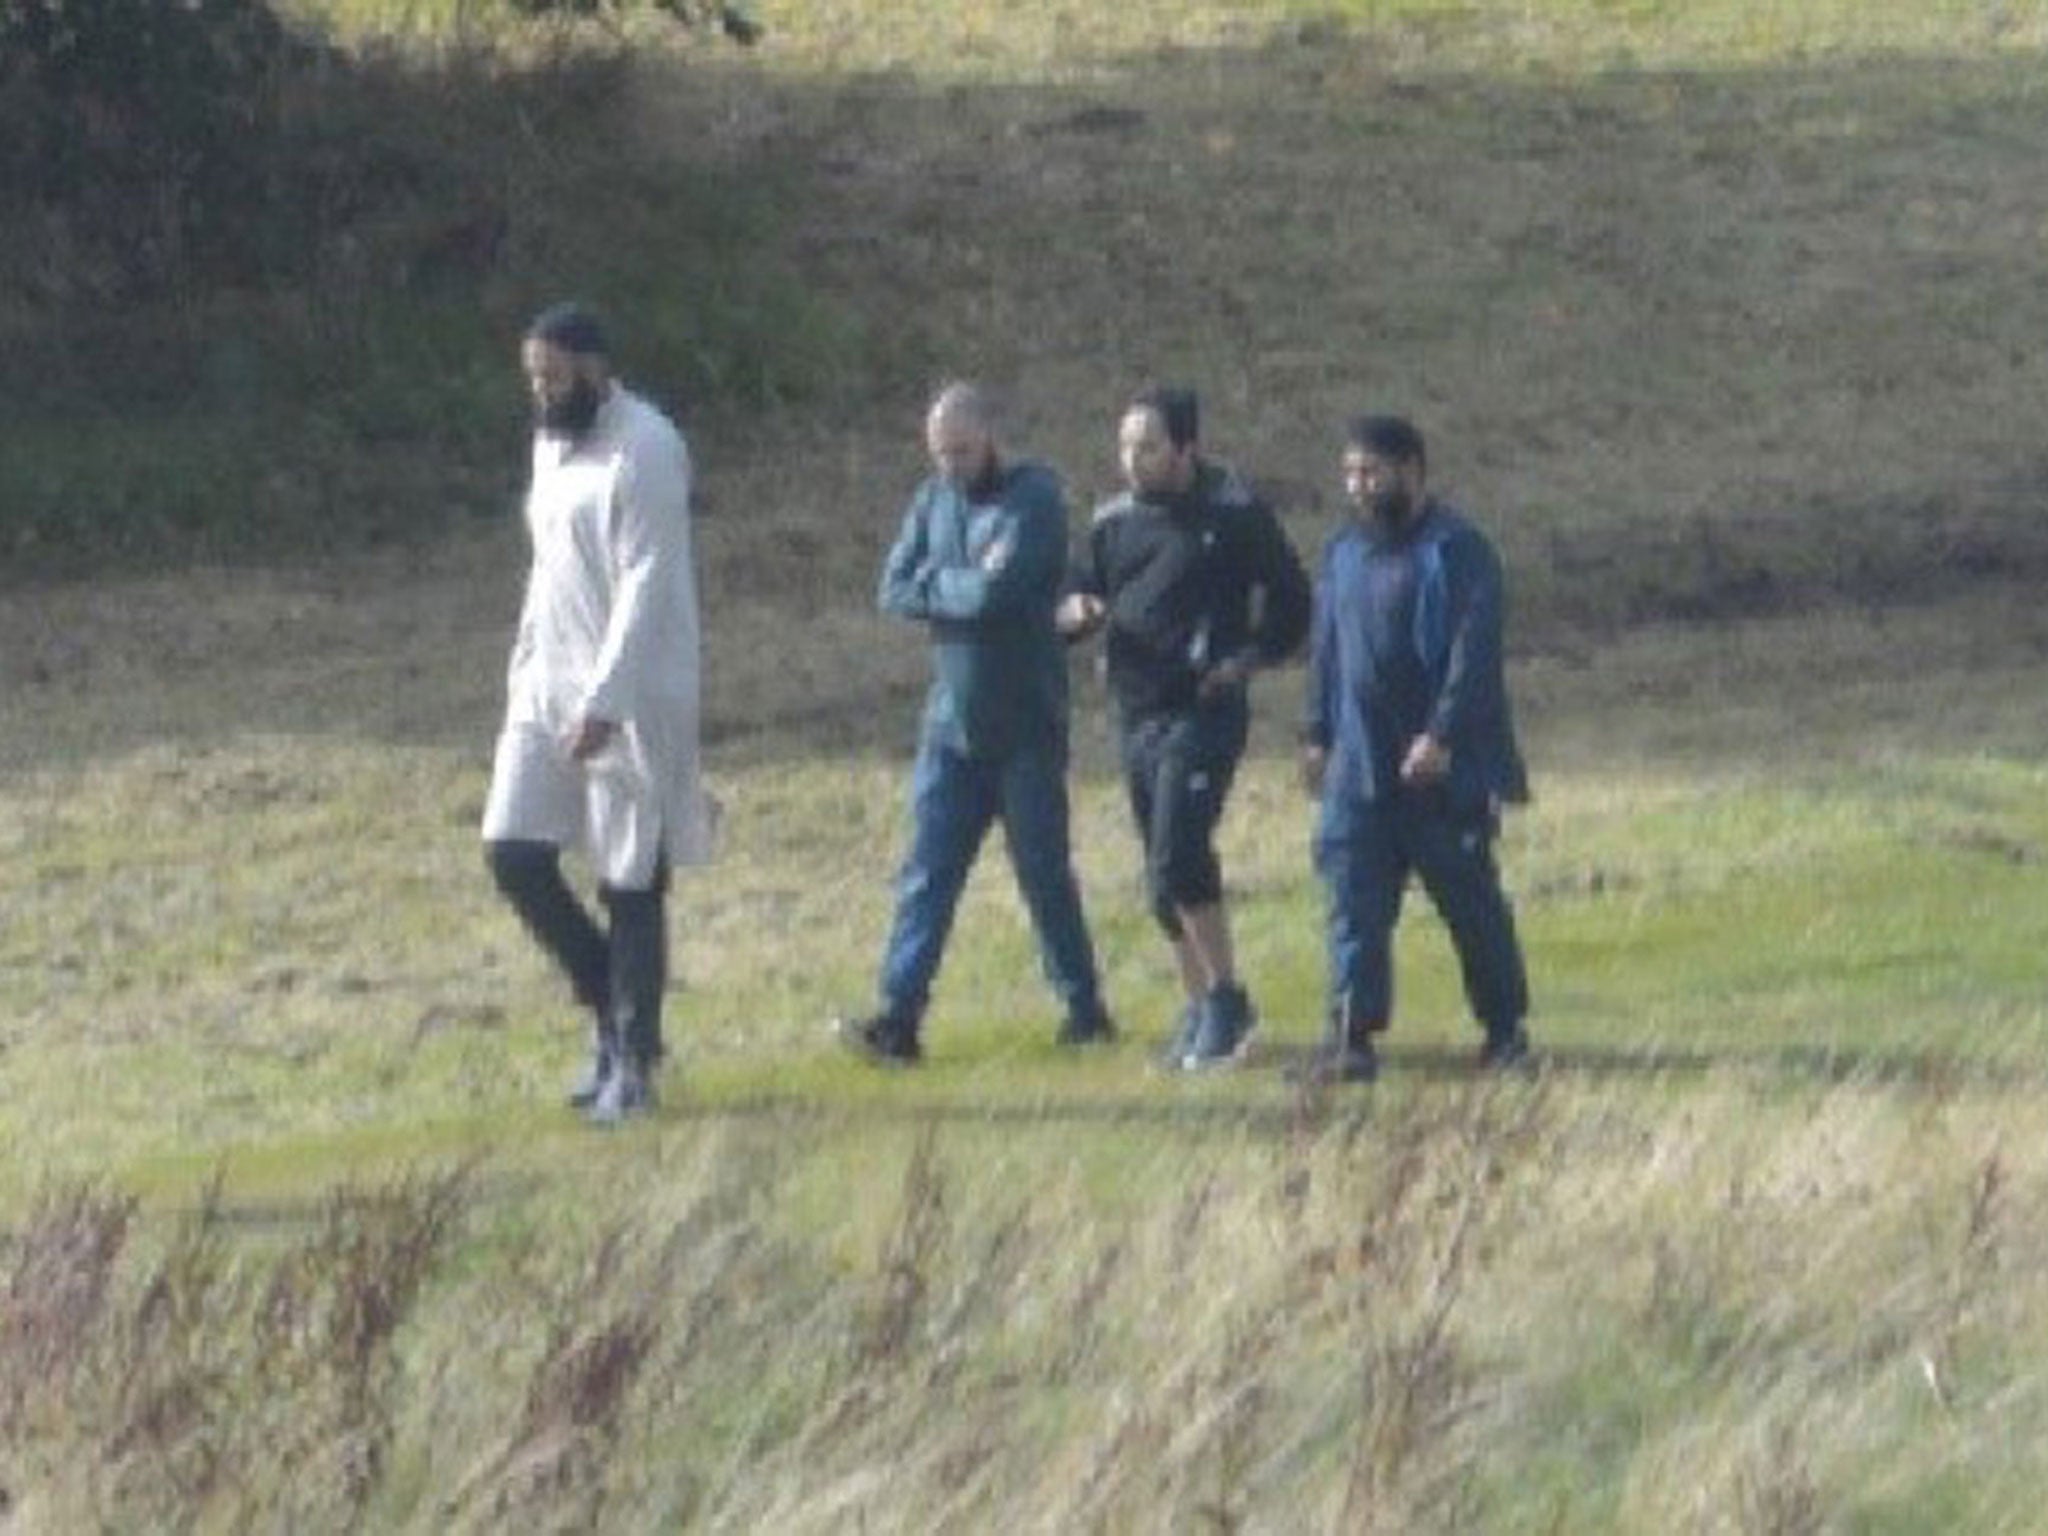 &#13;
Naweed Ali, Tahir Aziz, Mohibur Rahman and Khobaib Hussain in the park at Bank Hall Road in Stoke on 21 August 2016, five days before their arrests &#13;